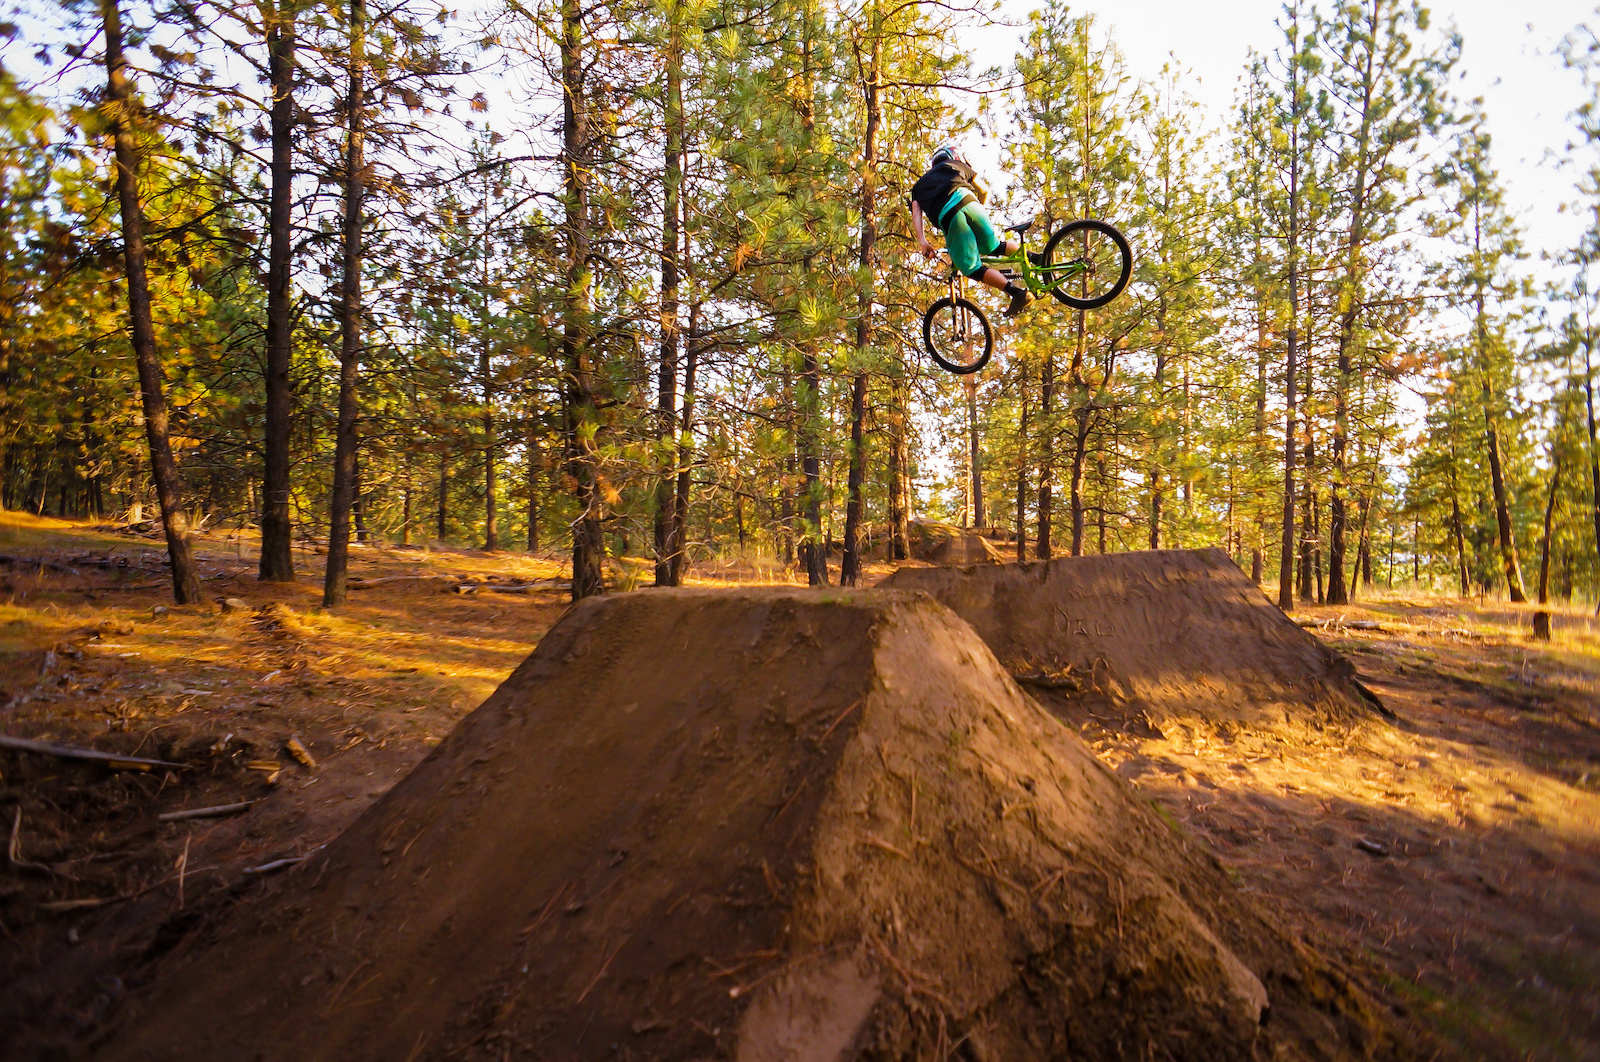 Caught some beauty evening light at the new jumps at Beacon Hill. 
Photo Credit: Kyle Miller